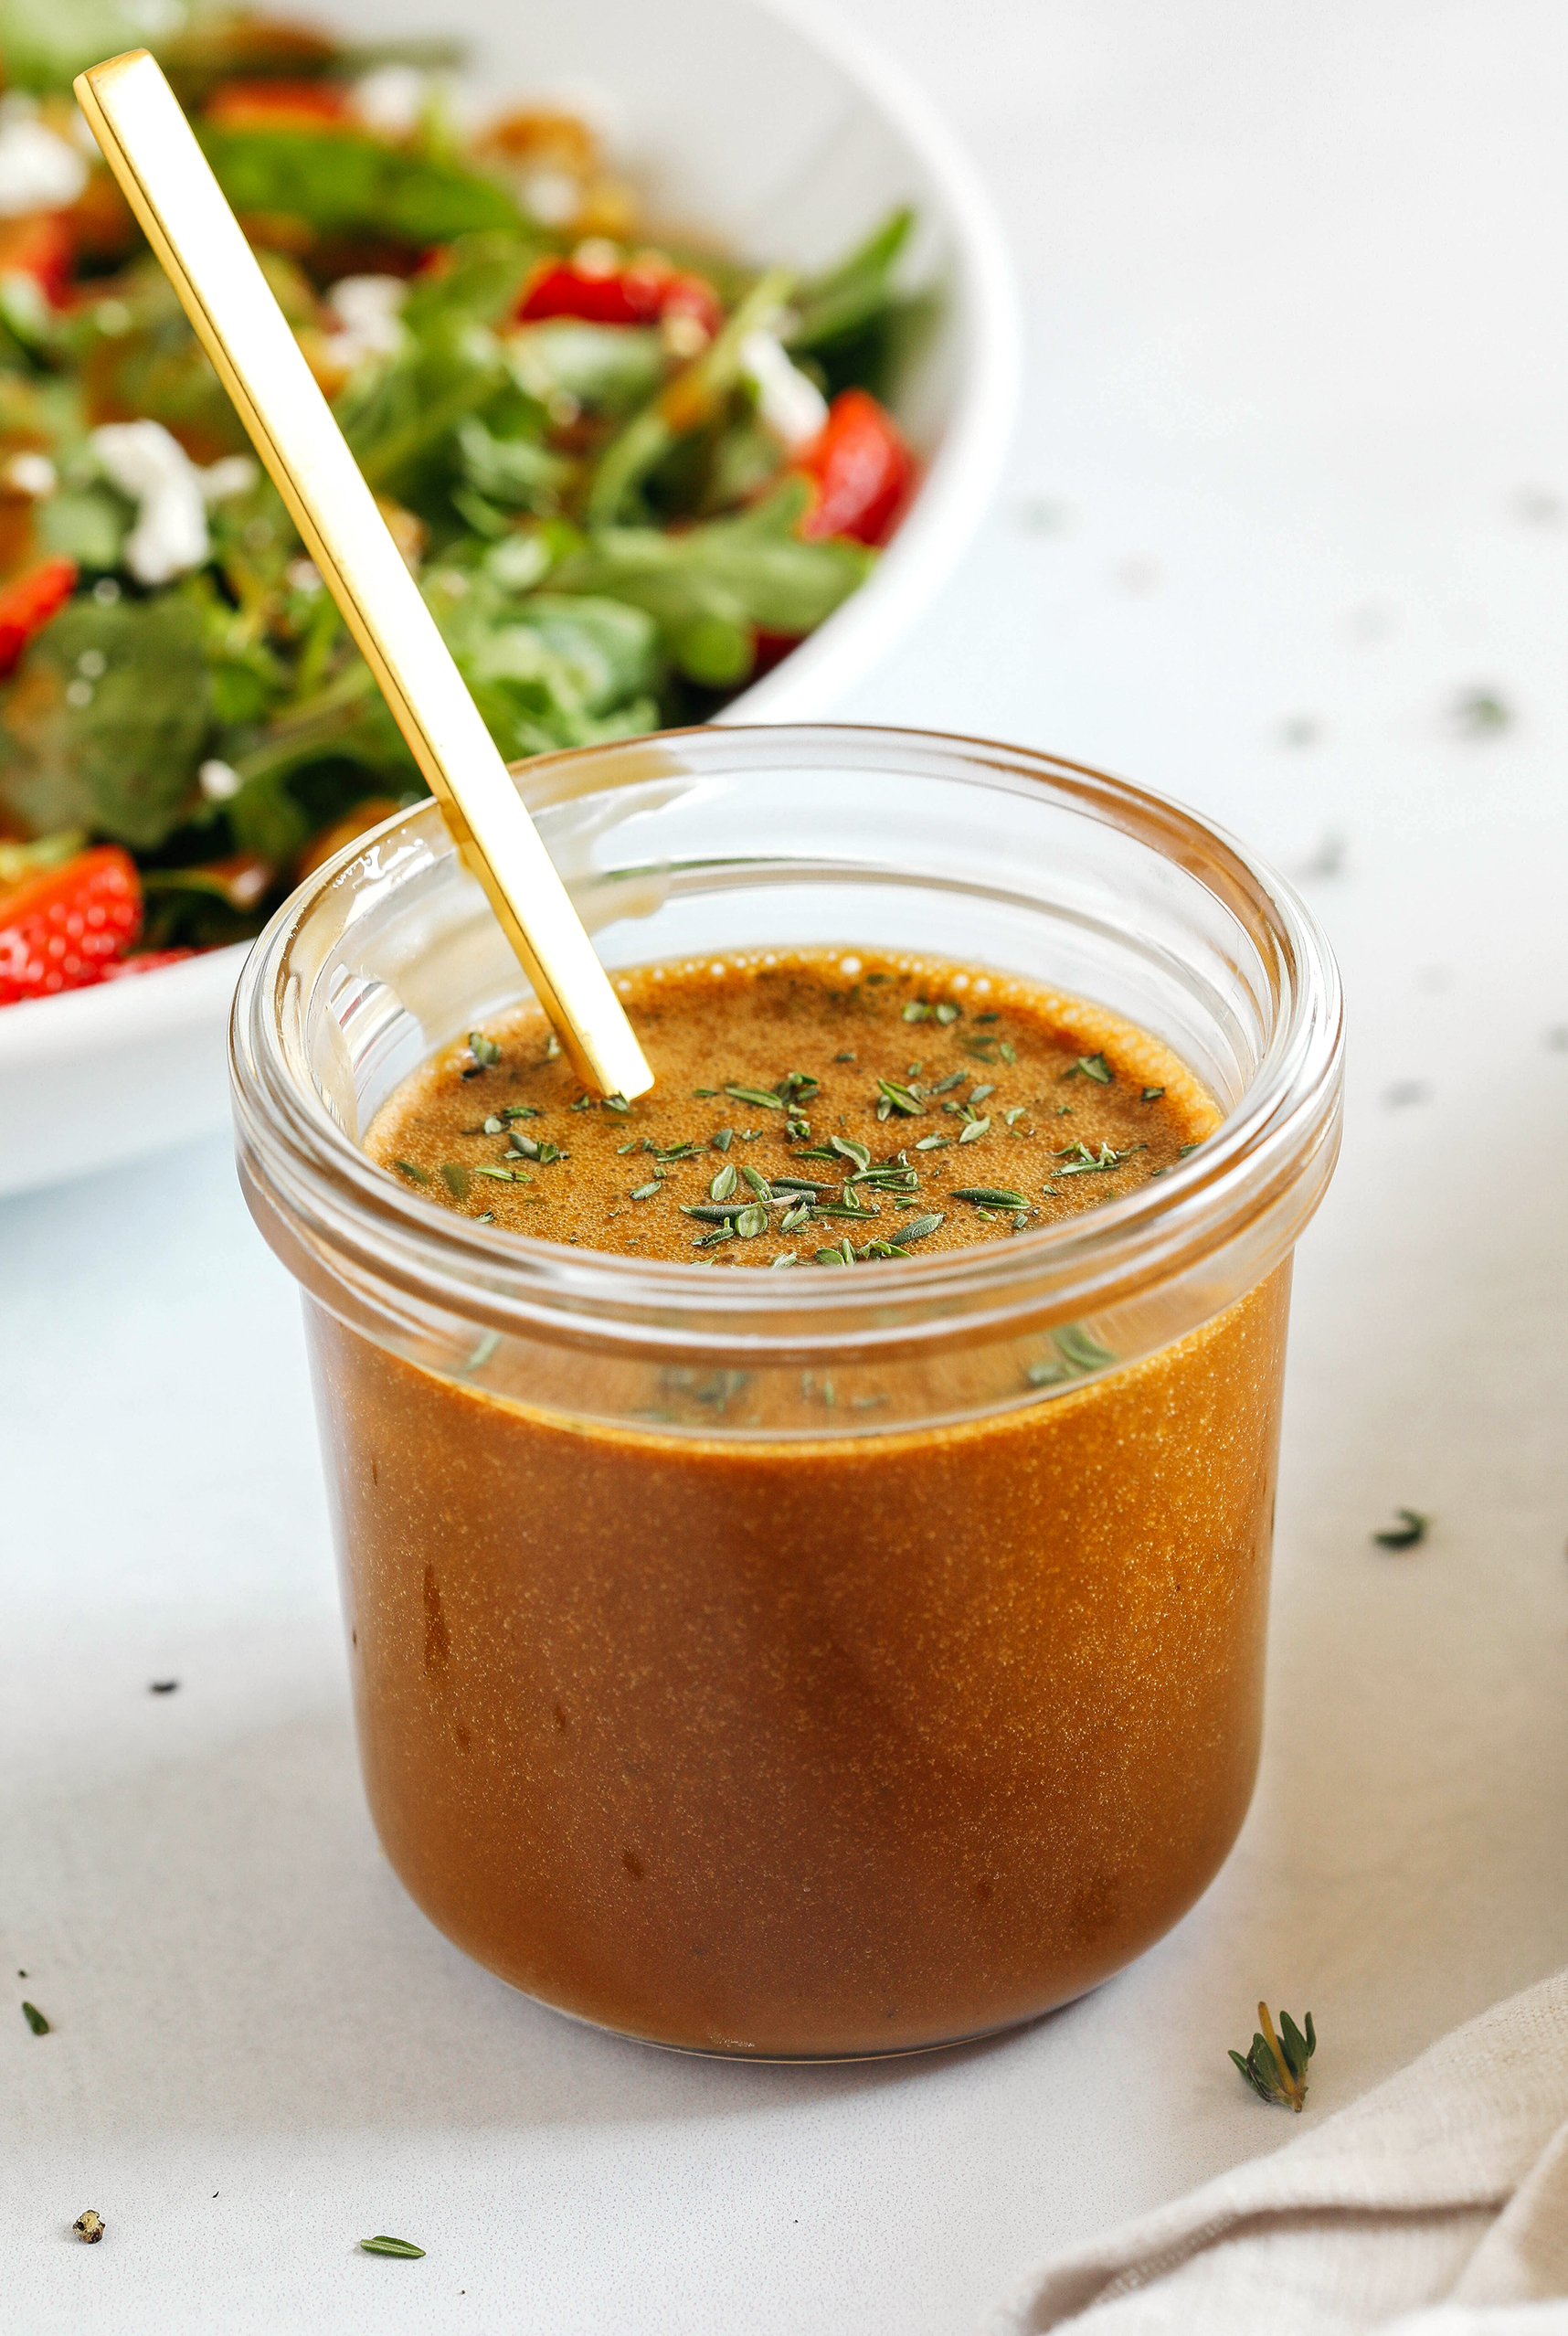 This Maple Balsamic Herb Dressing is fresh, tangy and made in just minutes with only 5 simple ingredients!  Perfect for salads, veggies, marinades, and more!